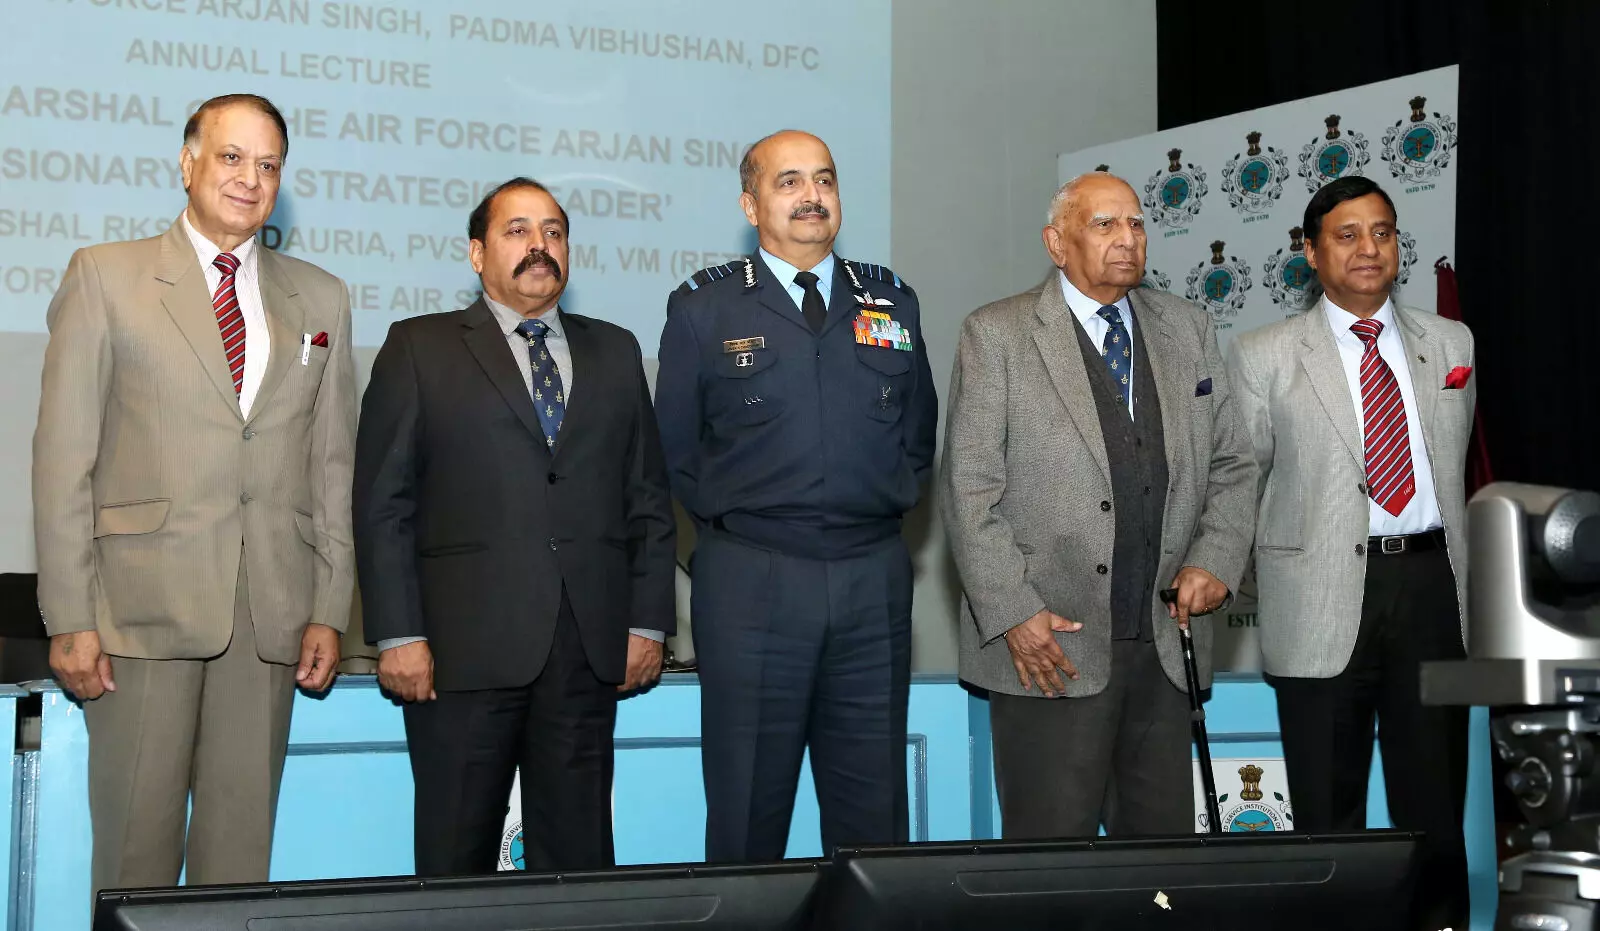 IAF and USI Commemorate Marshal of the Air Force Arjan Singh with Inaugural Annual Lecture